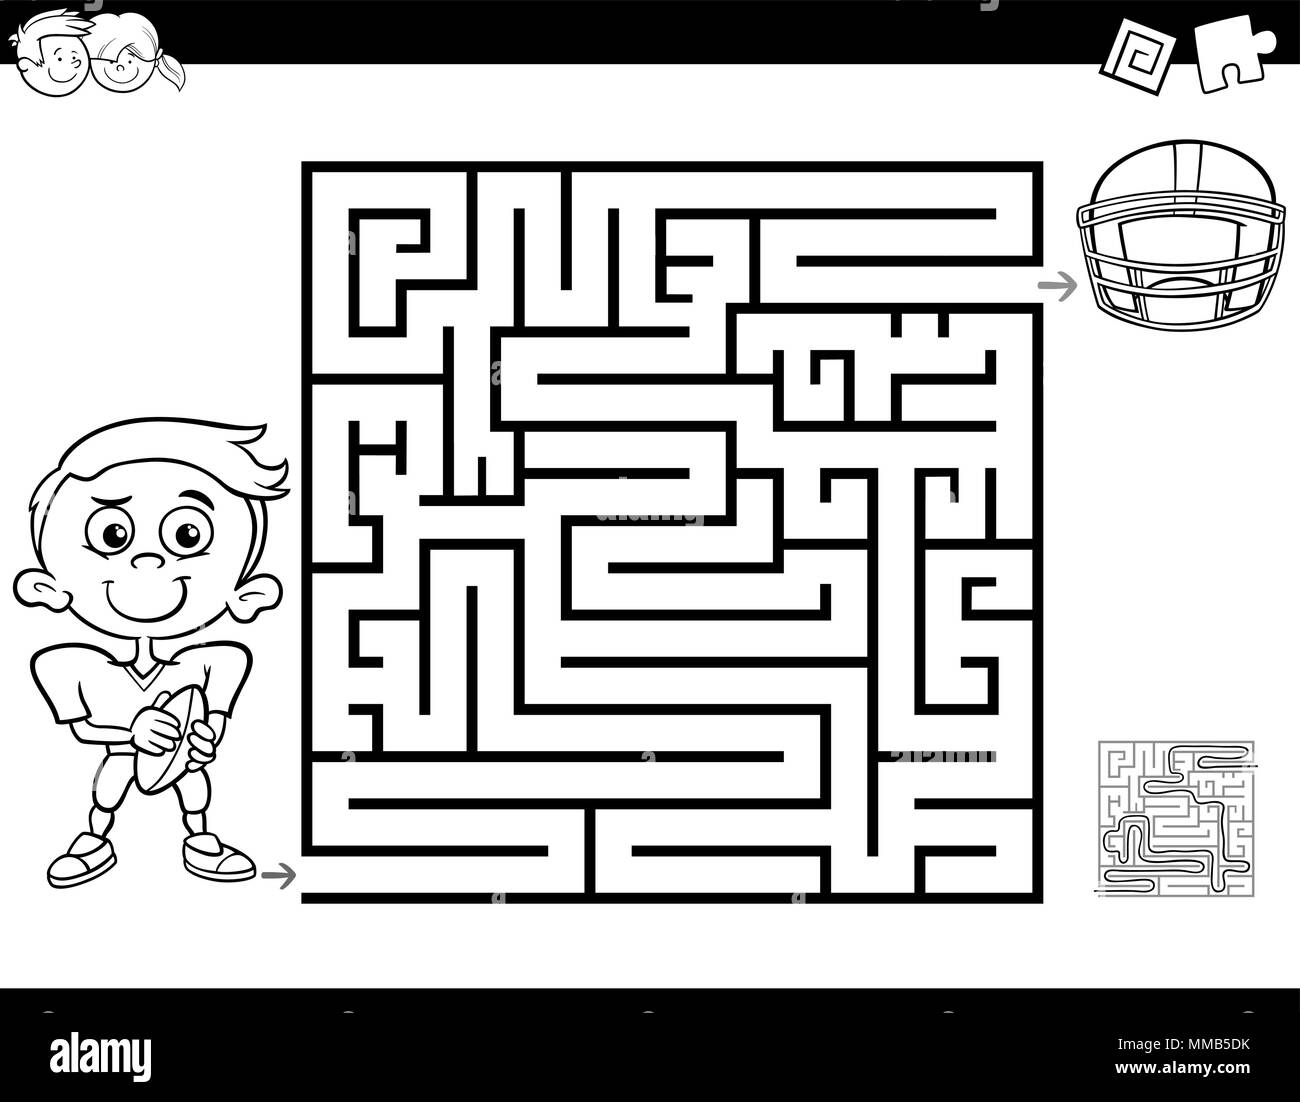 Black and White Cartoon Illustration of Education Maze or Labyrinth Activity Game for Children with Little Boy and Football Coloring Book Stock Vector